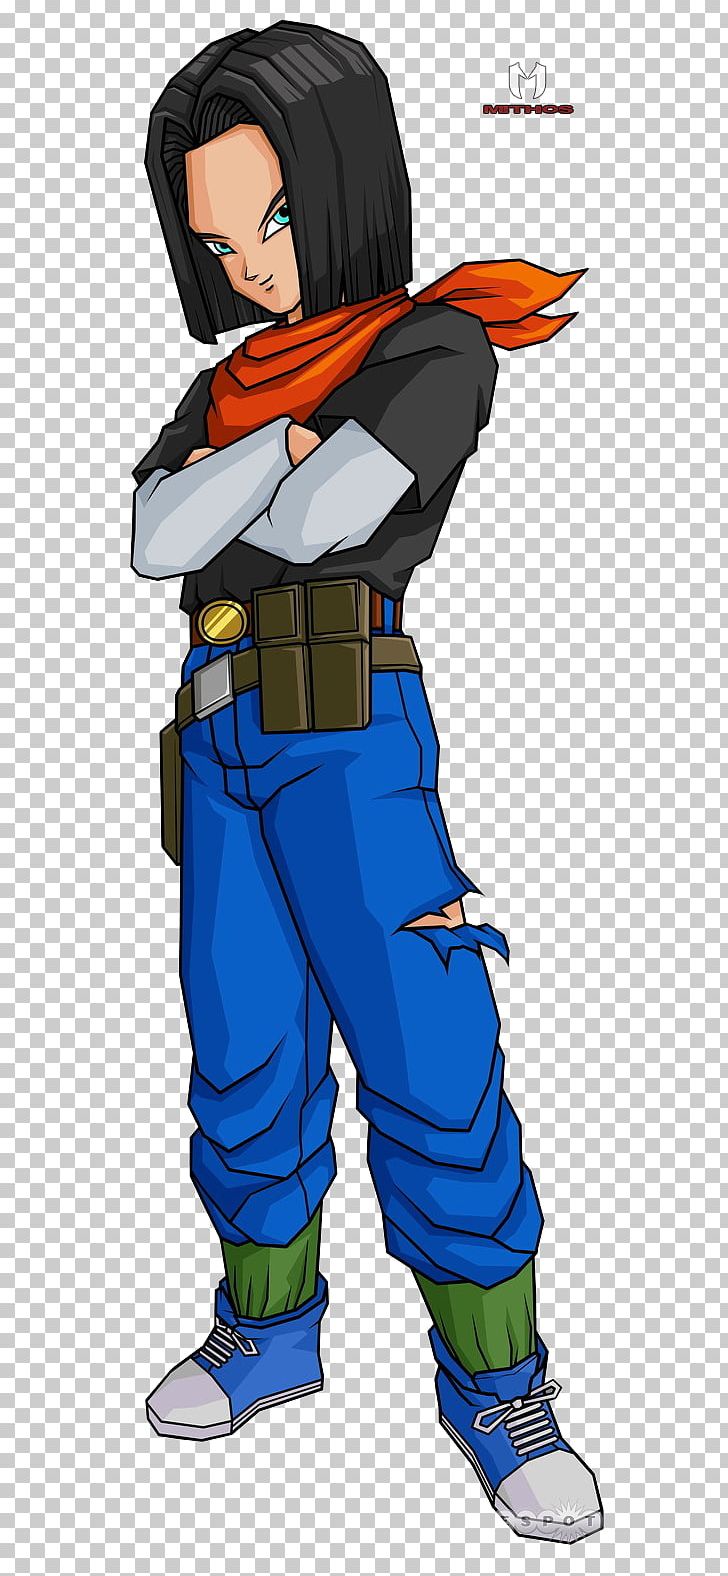 Dragon Ball Z Android 17 Trunks Vegeta Goku PNG, Clipart, Anakin, Android, Android 2, Android 17, Android 18 Free PNG Download